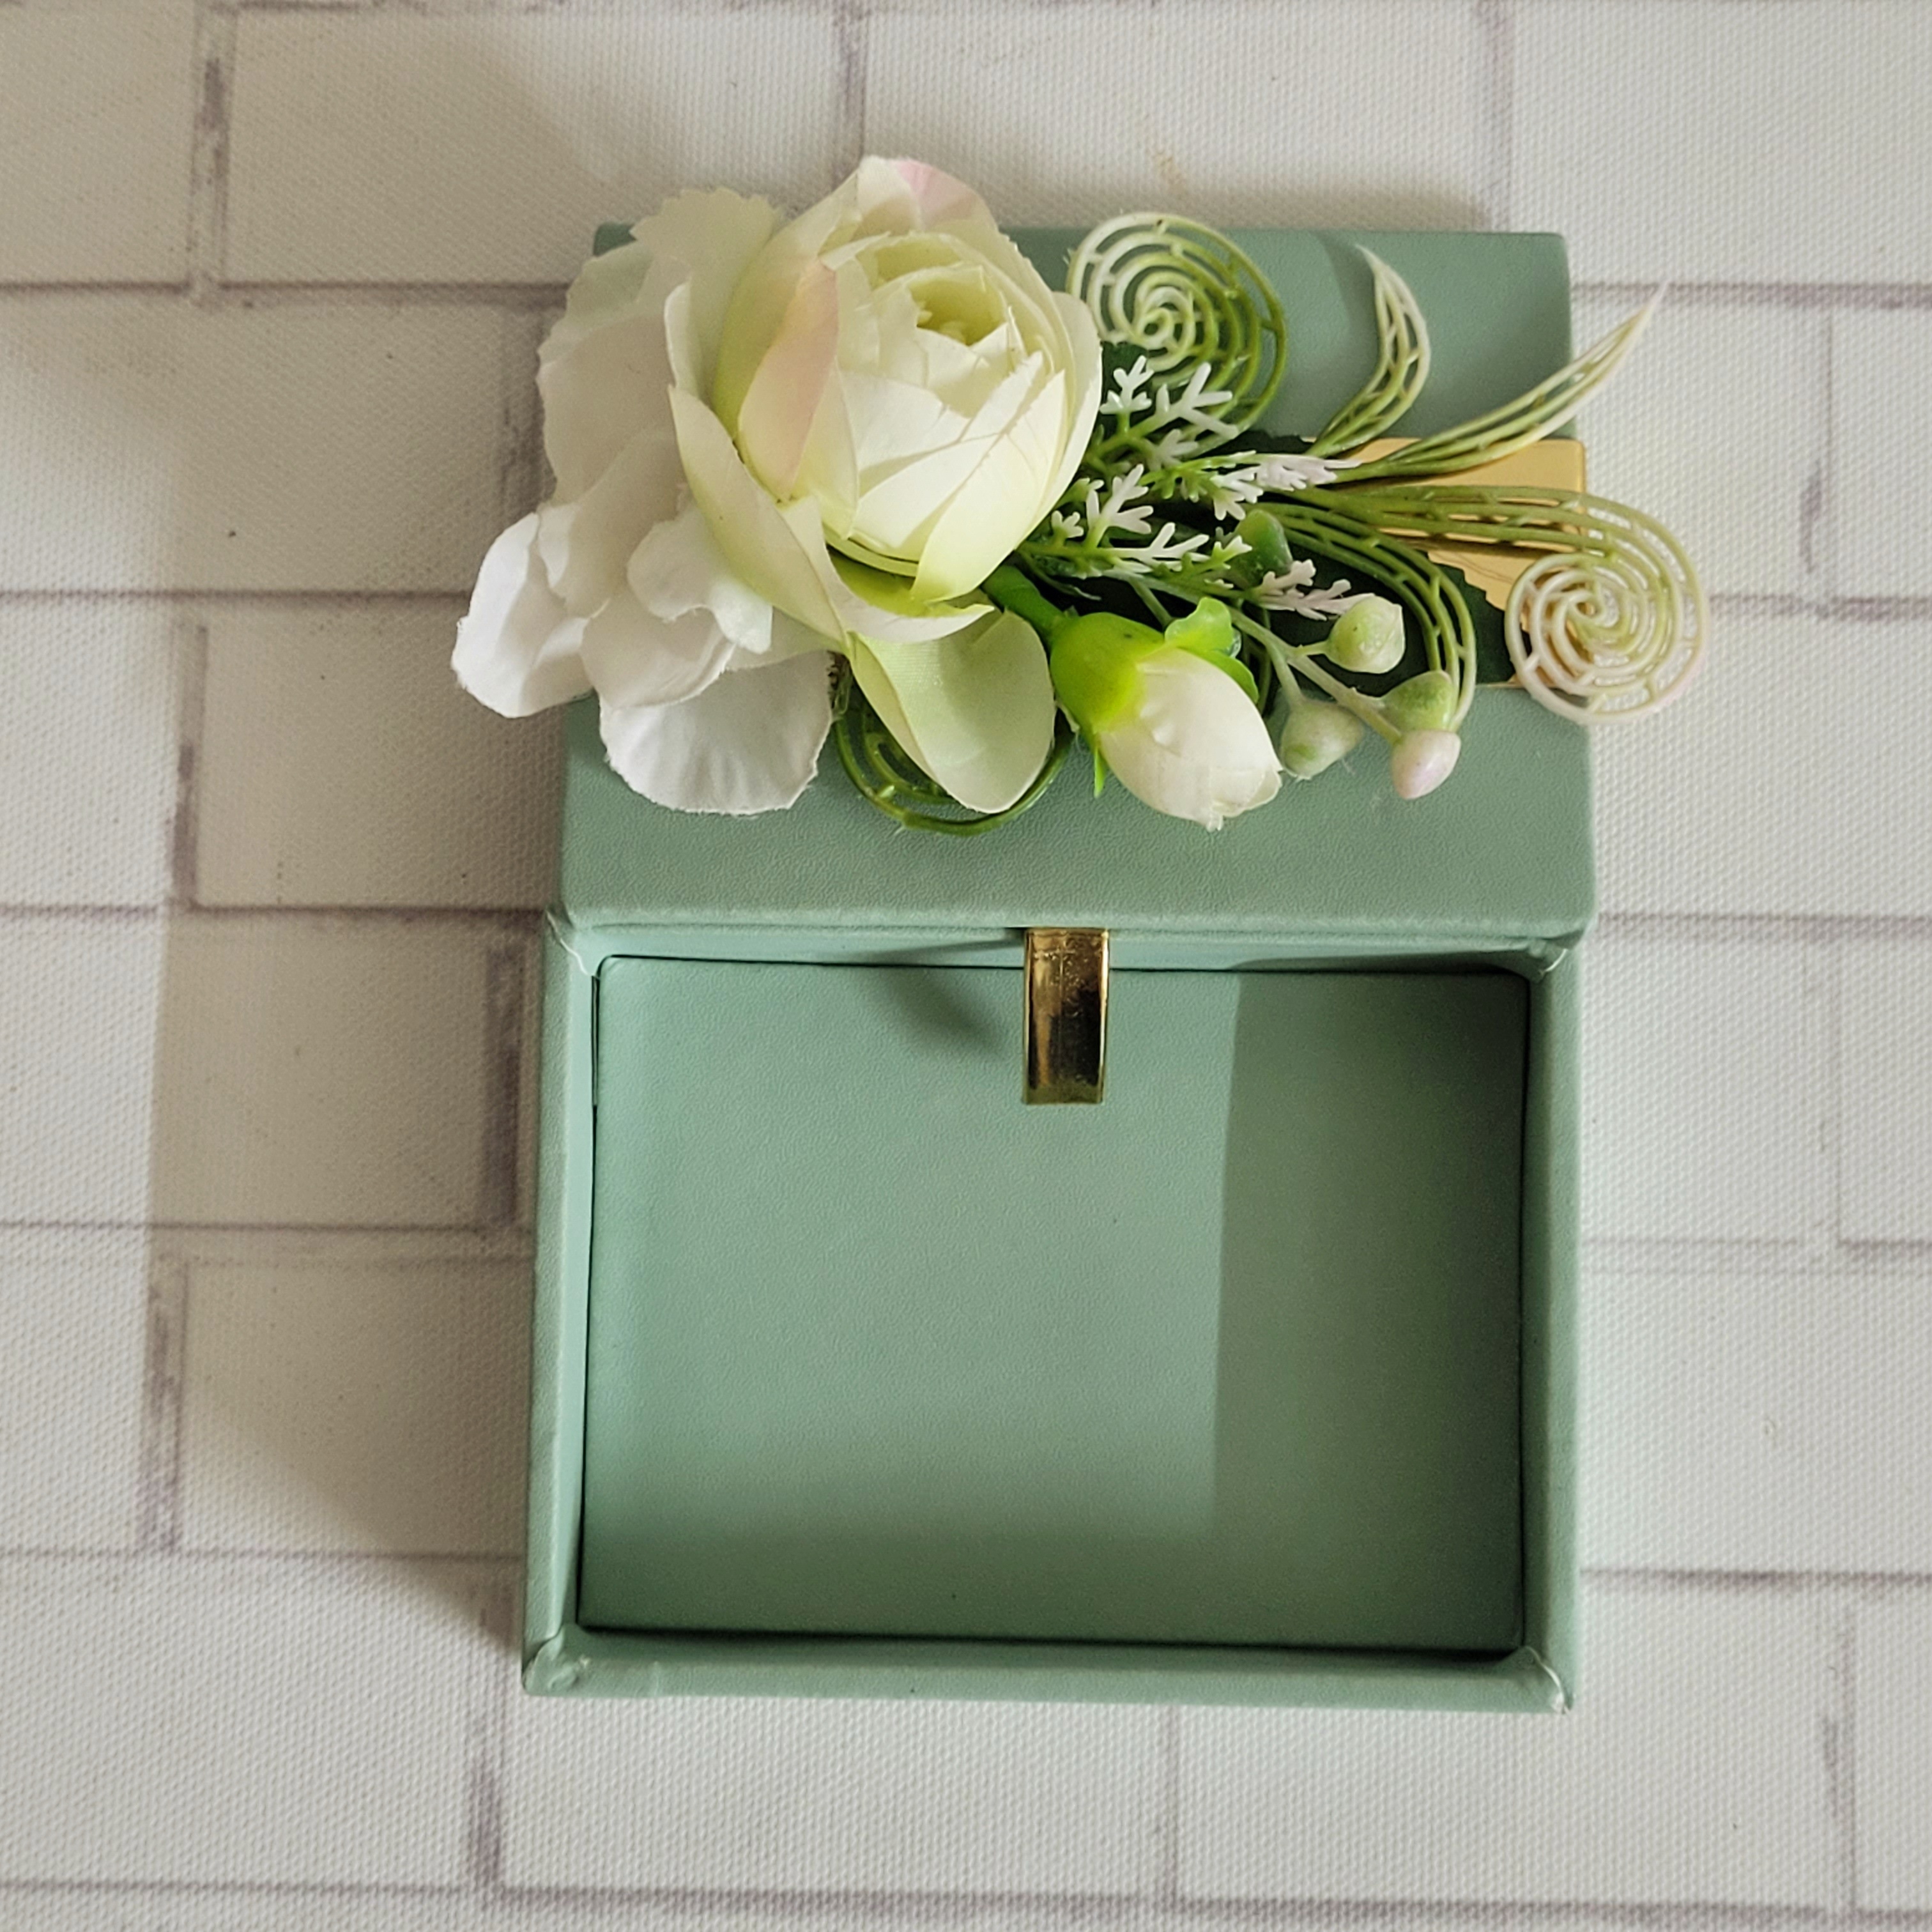 Floral art | Blue Card Box Leather Stuff with Artifical Flower undefined